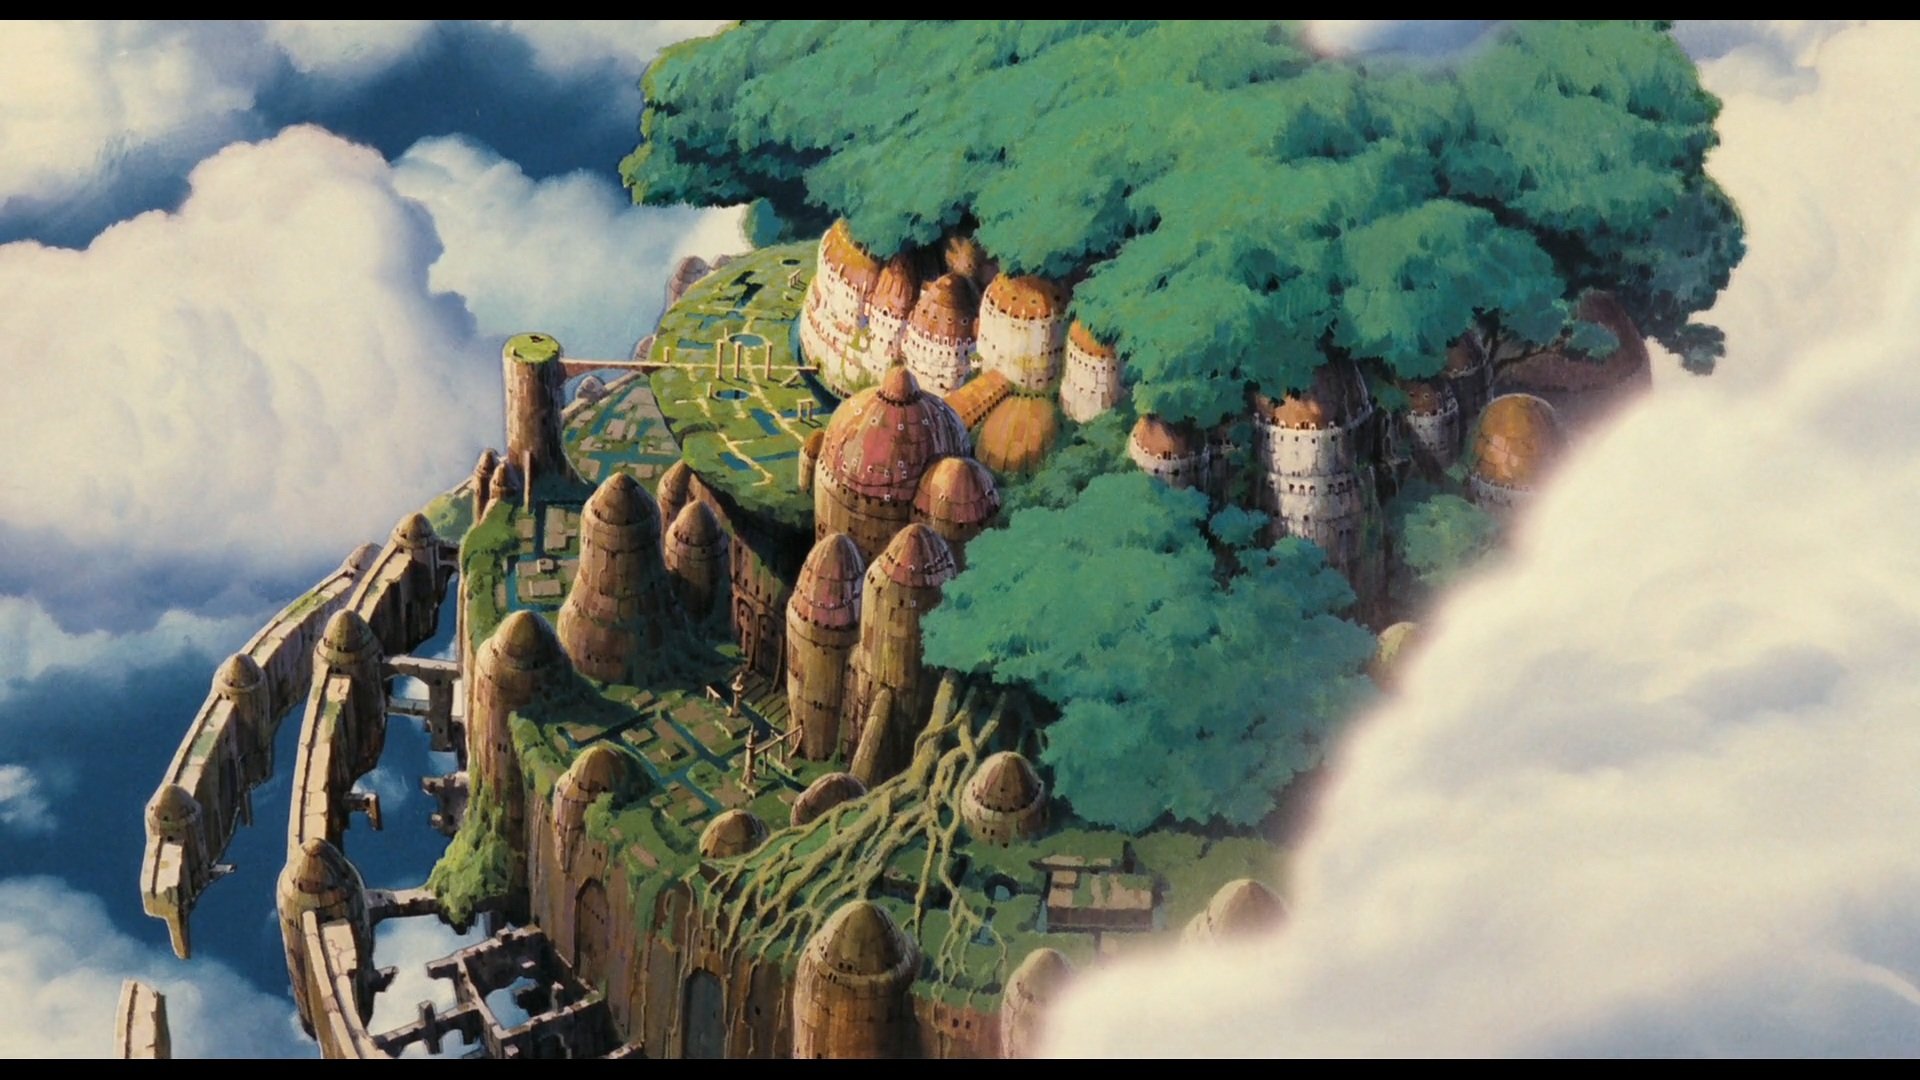 Best Laputa: Castle In The Sky wallpaper ID:186196 for High Resolution full hd computer